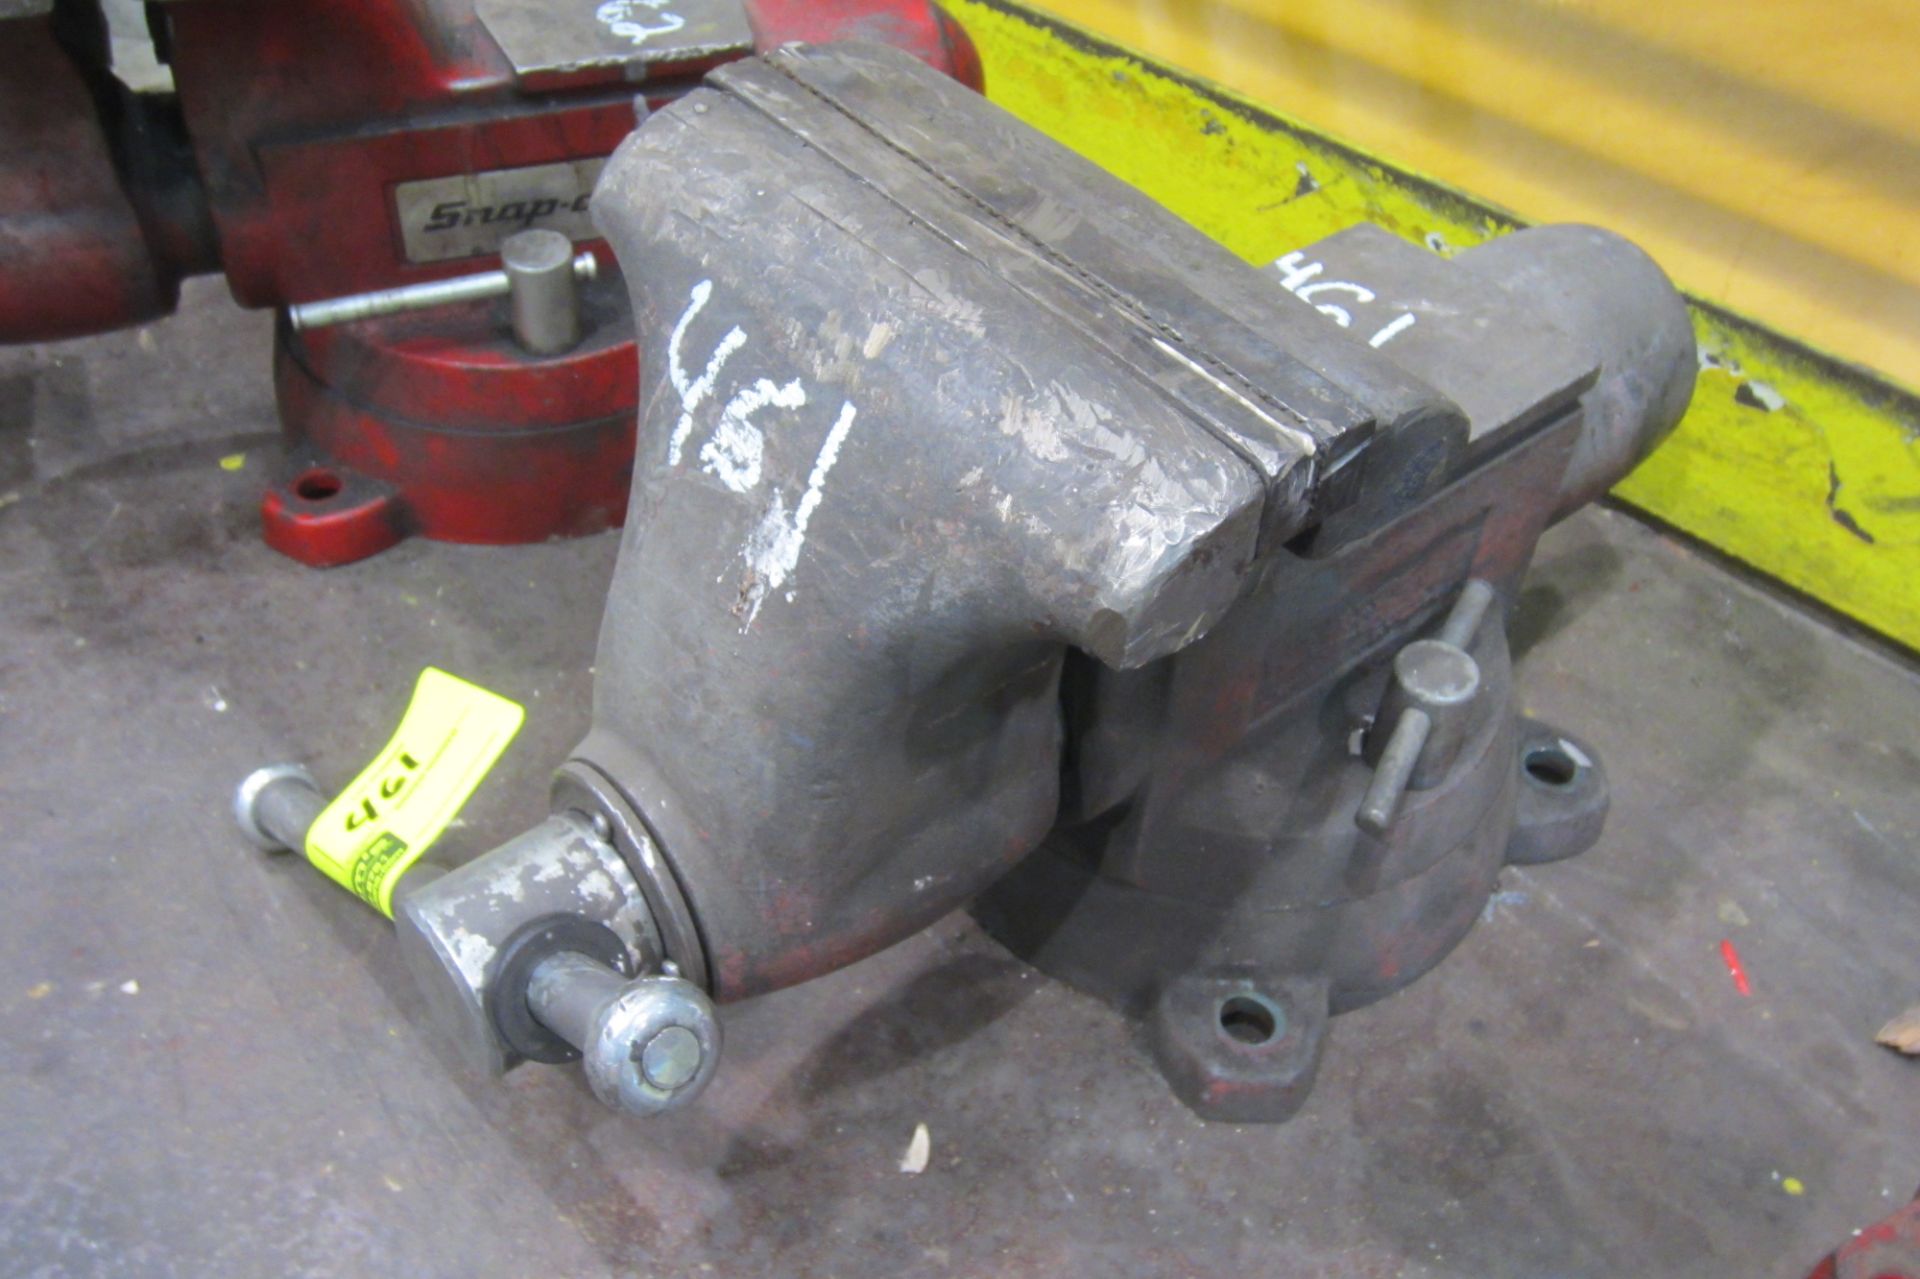 VISE WITH 8" JAW